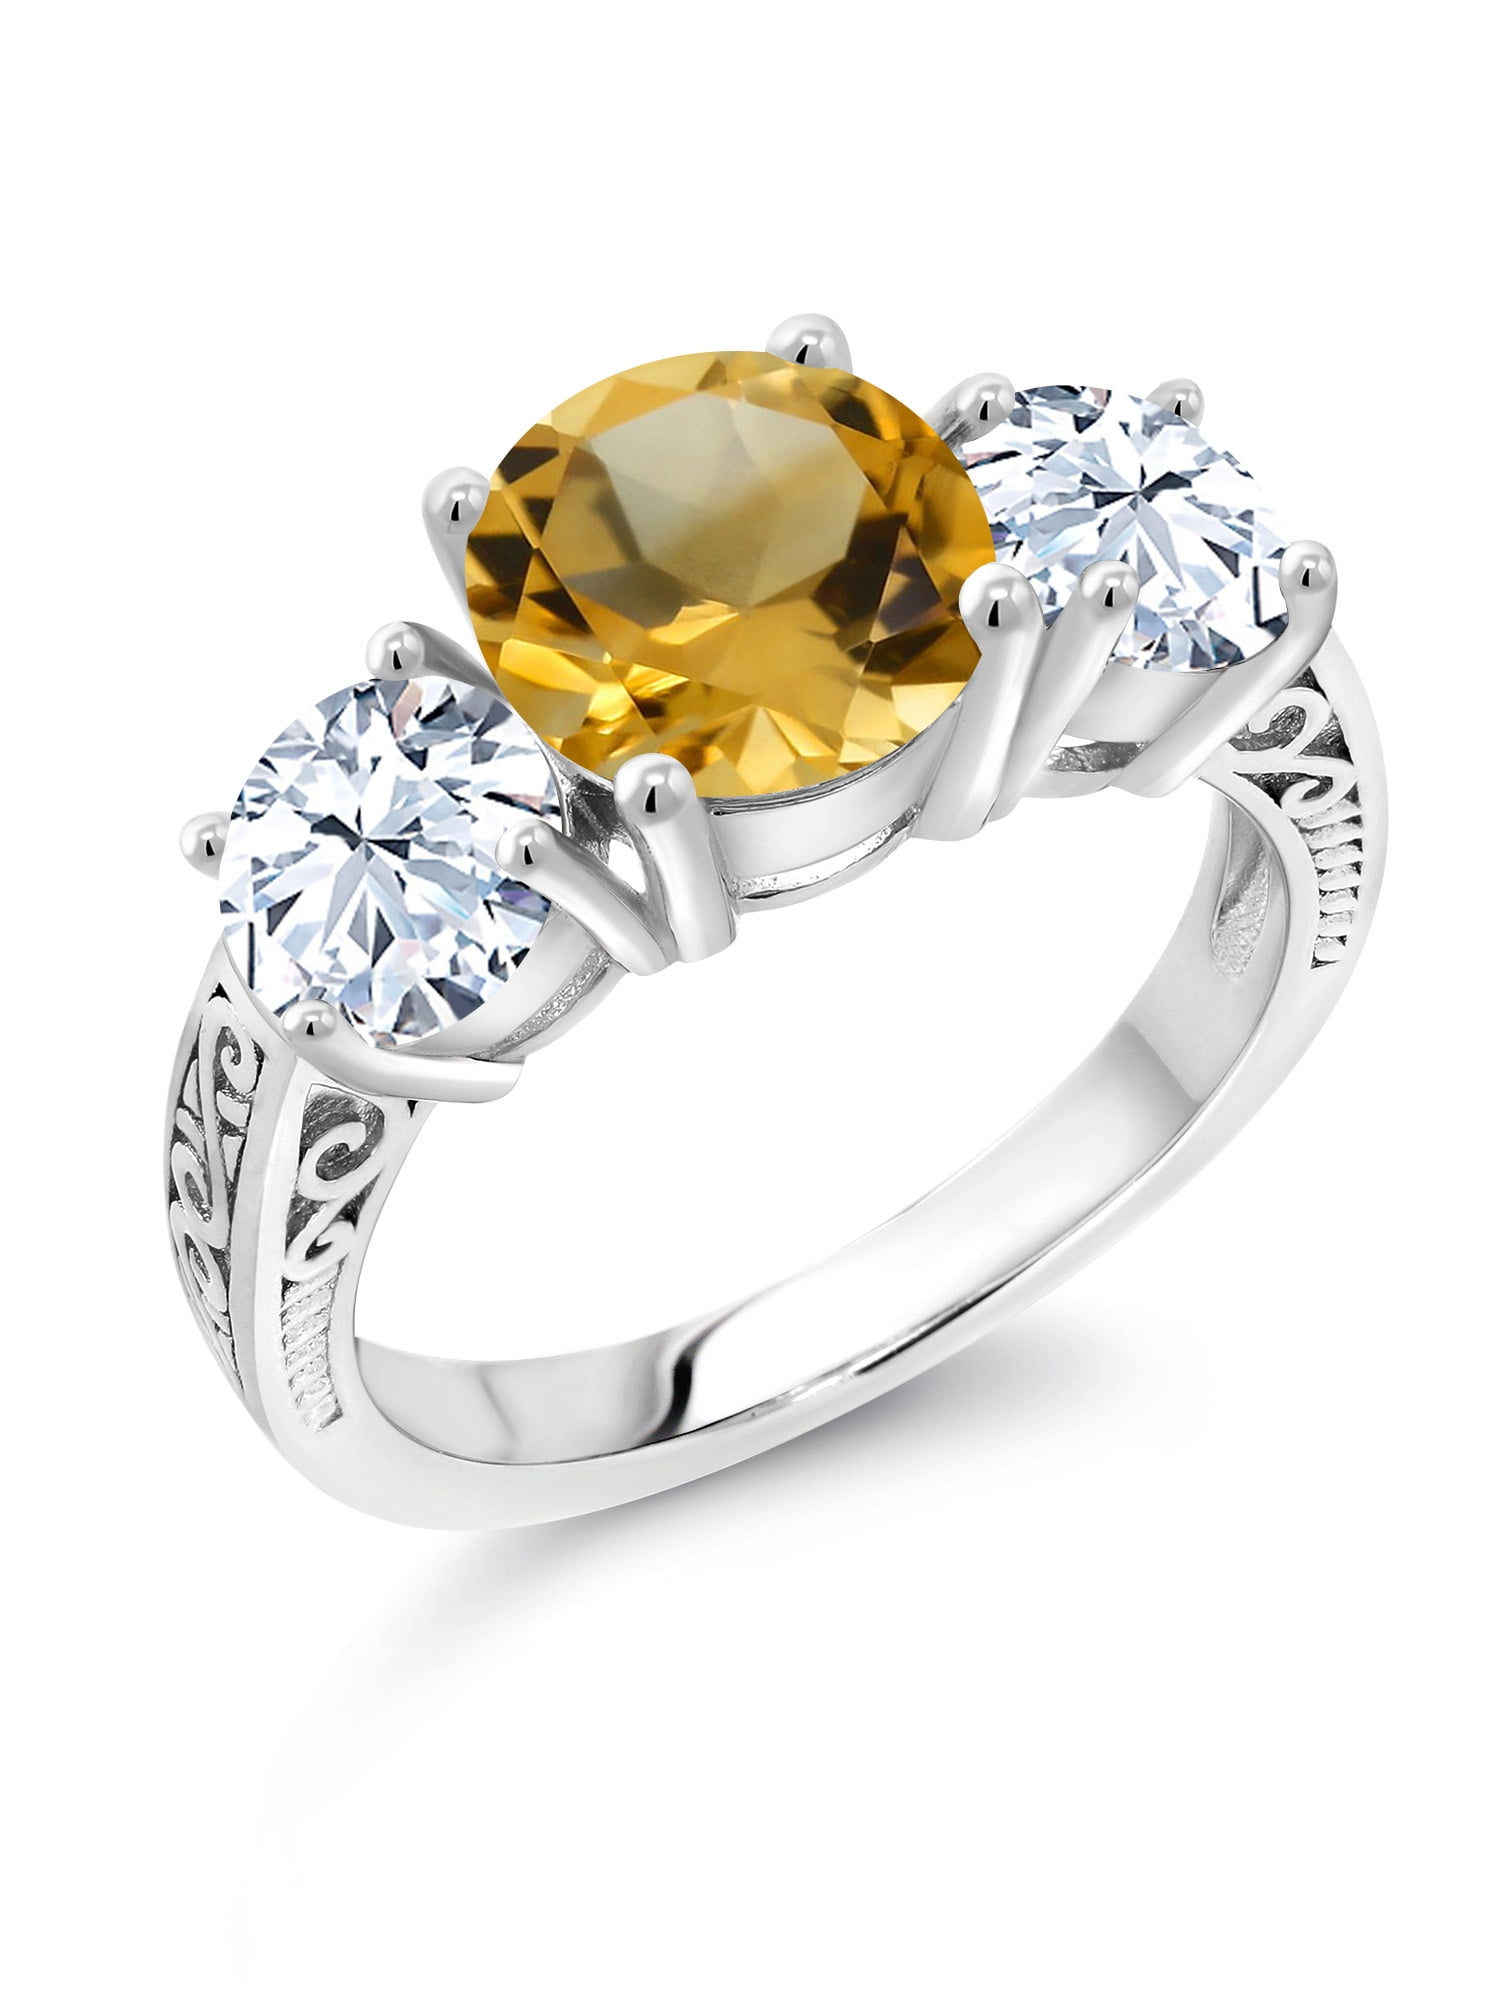 Halo Ring 925 Sterling Silver Citrine White Cubic Zirconia CZ Gift Jewelry for Women Size 7 Ct 2.1 